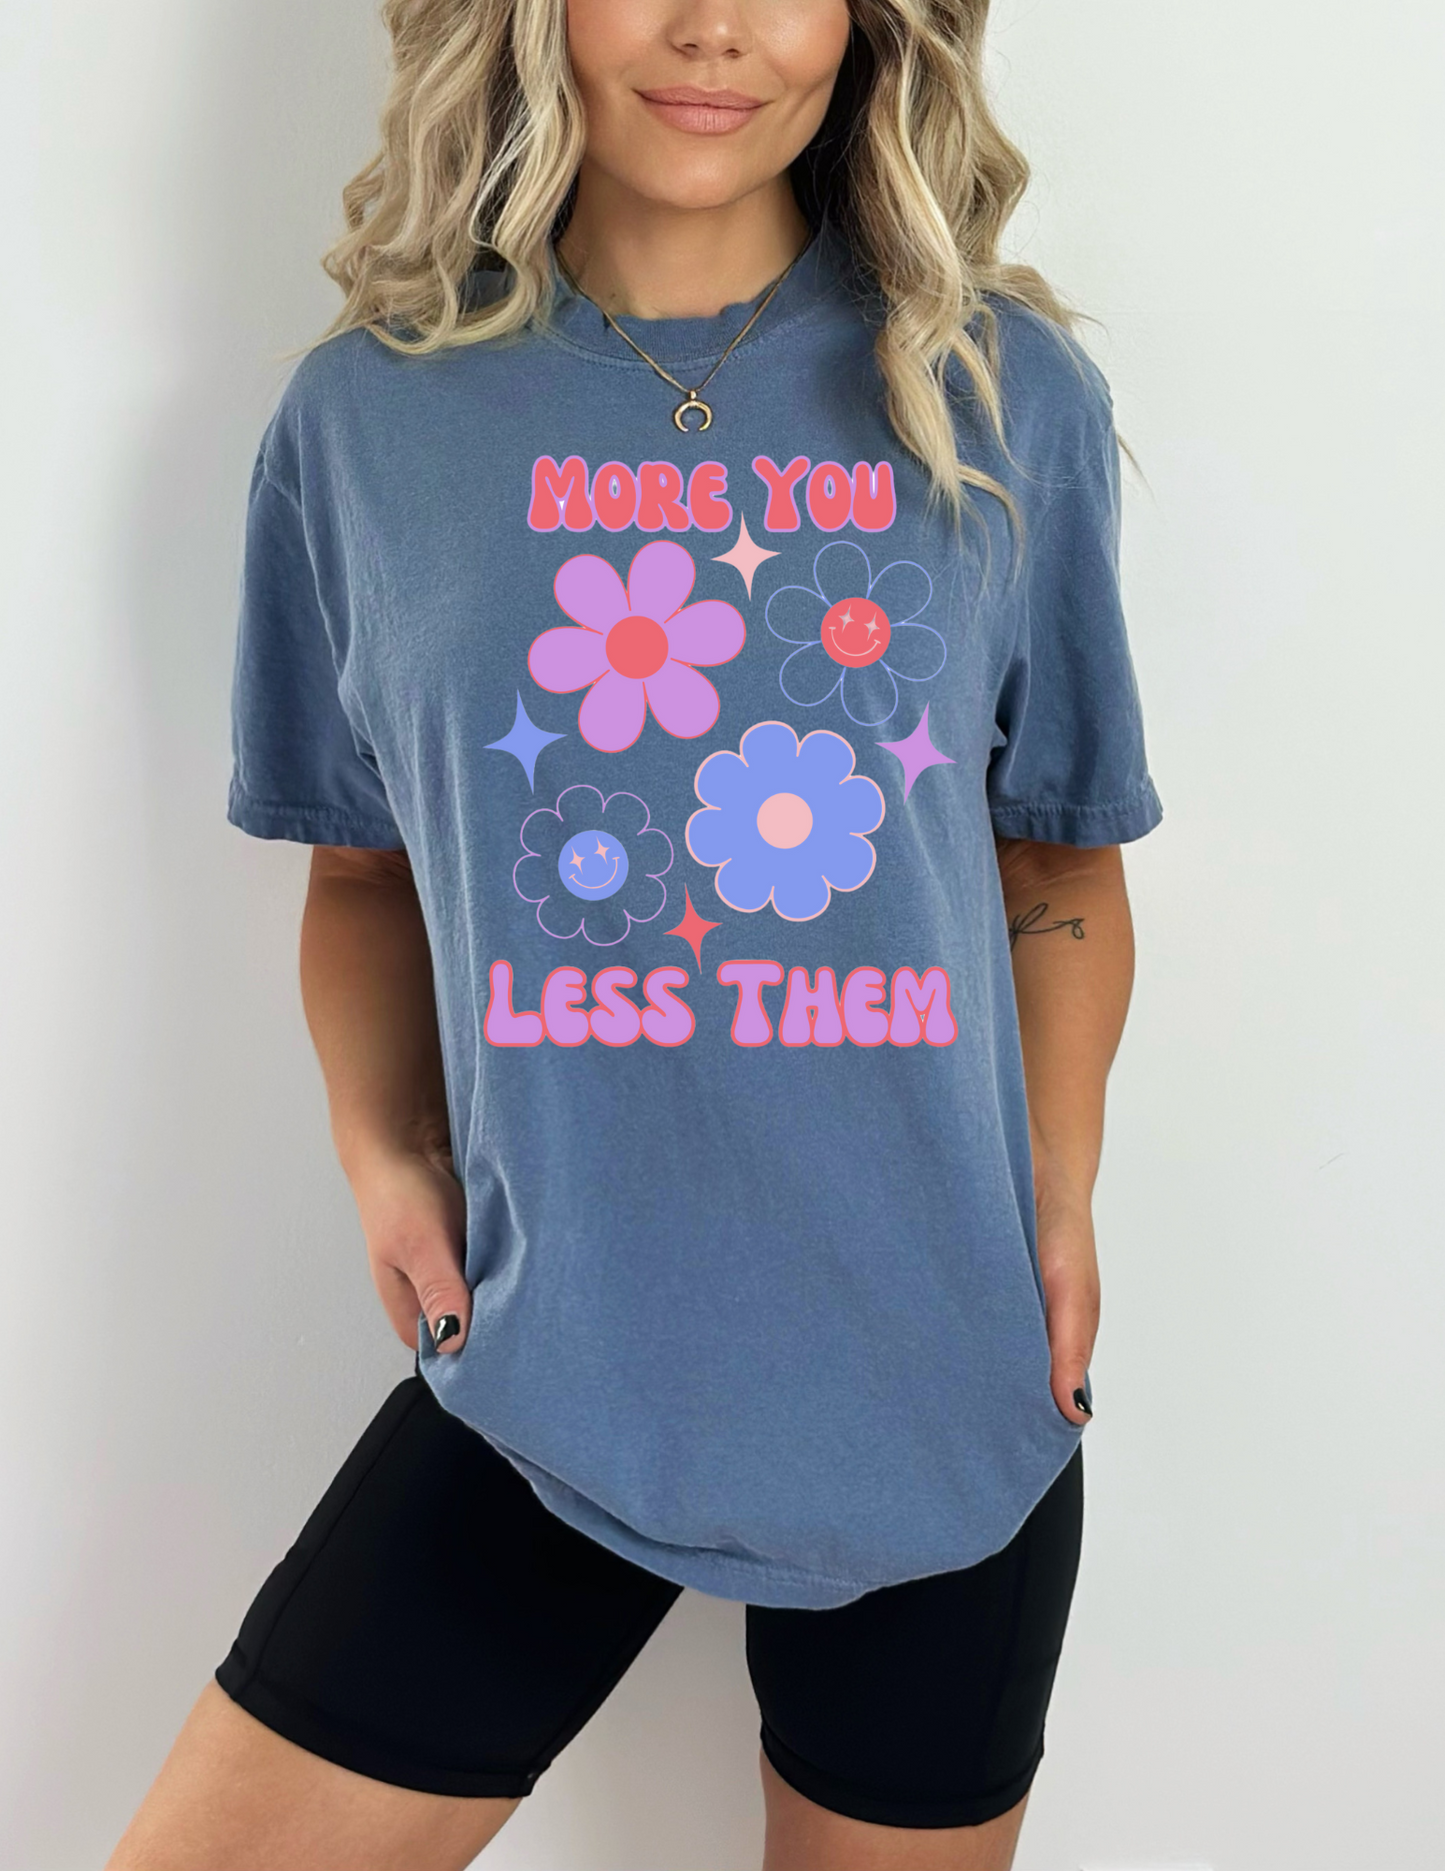 "More You Less Them" Graphic Tee